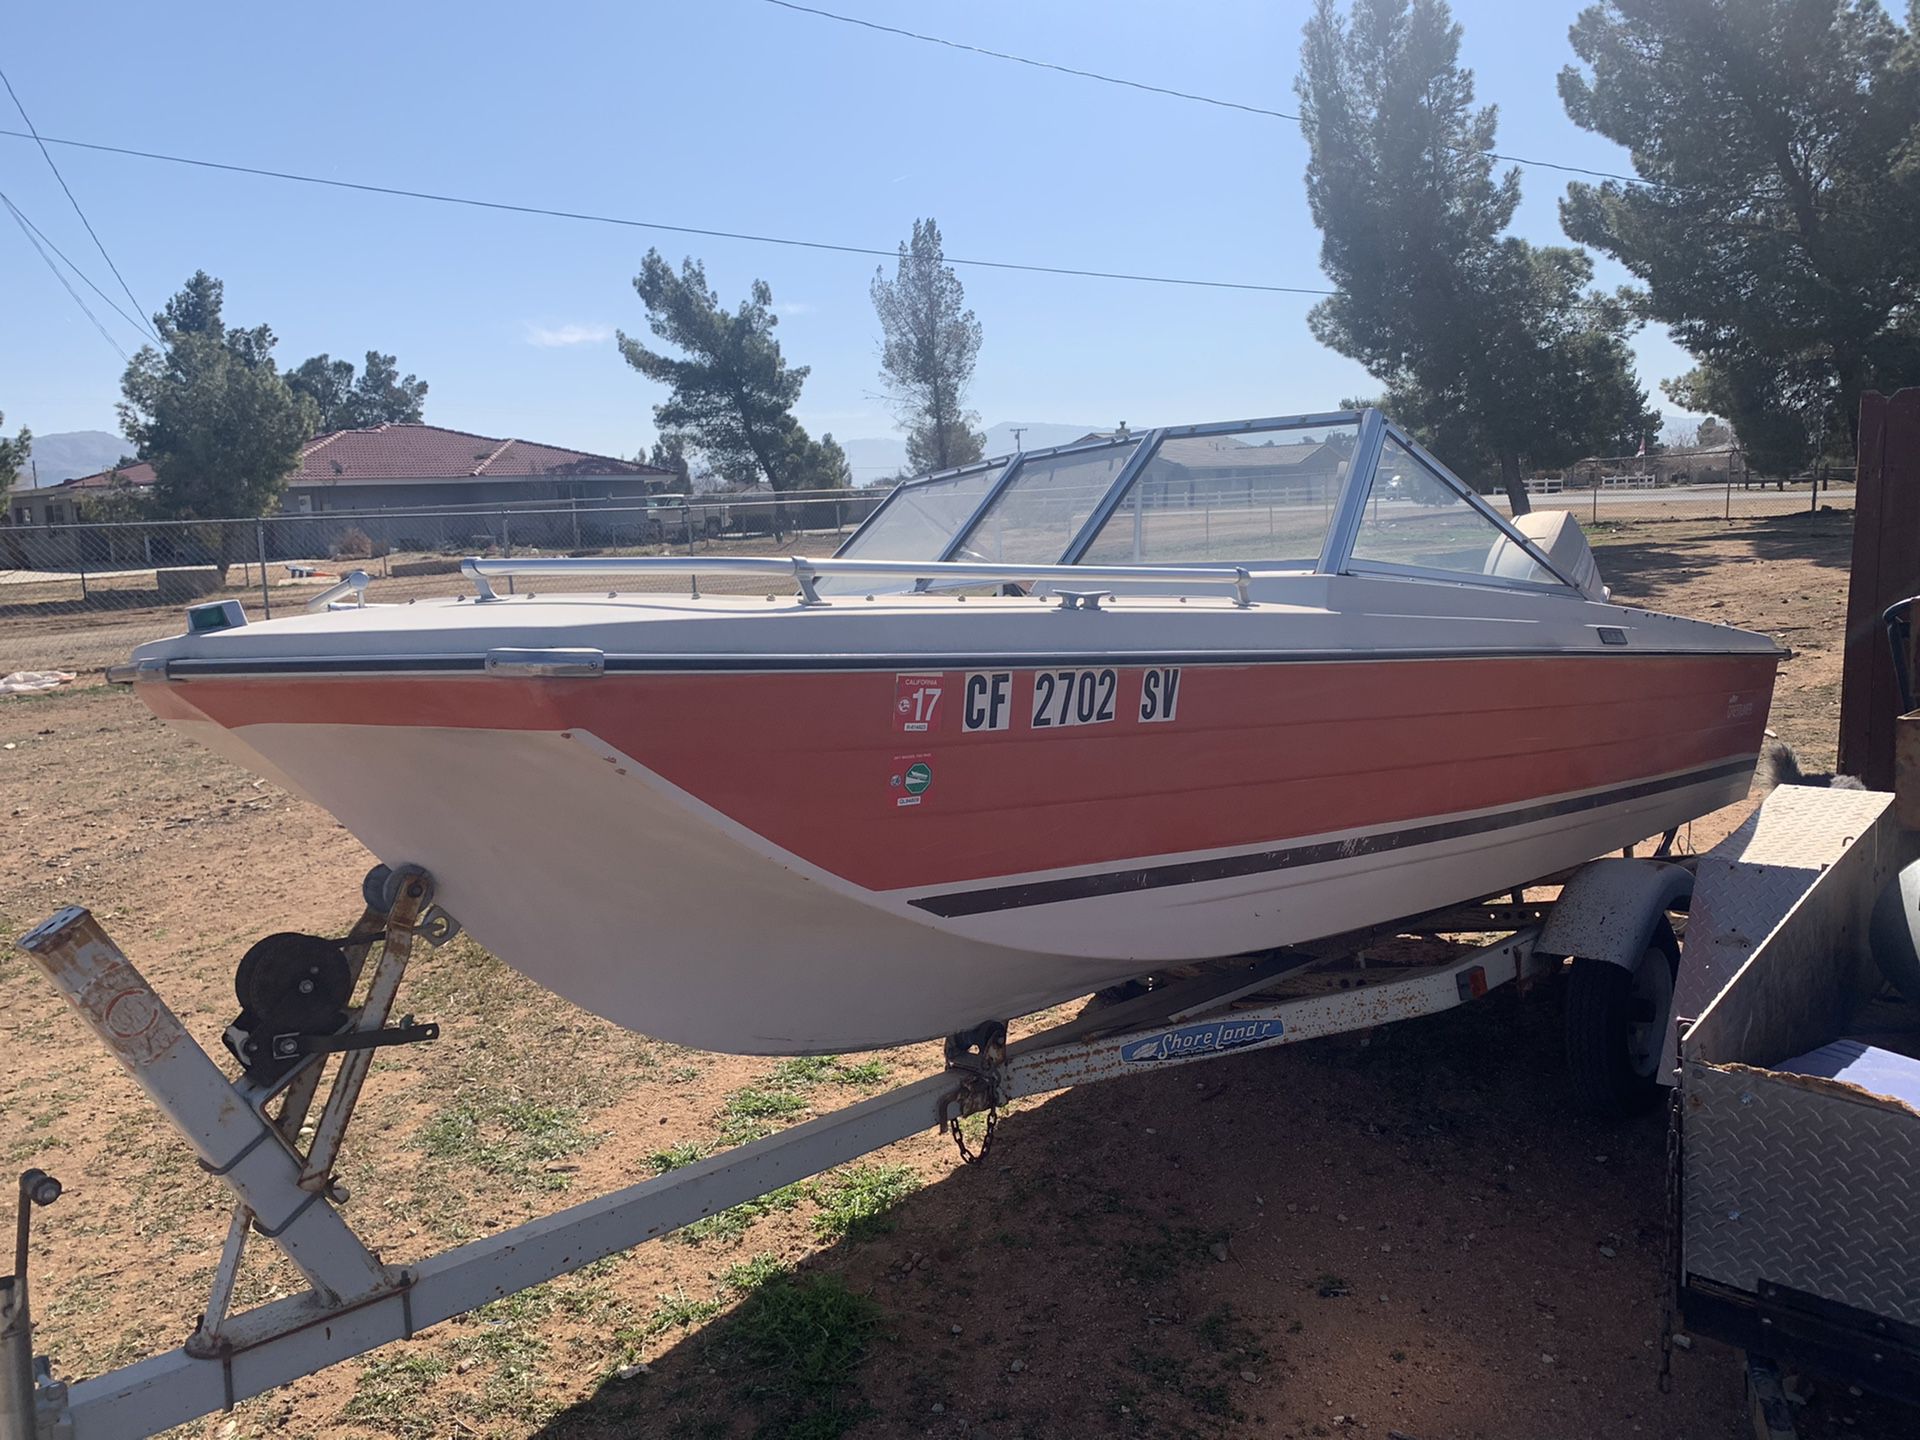 Crest liner 1977 with a Evanrude 70horse outboard with trailer 1000 or best offer it has a new motor